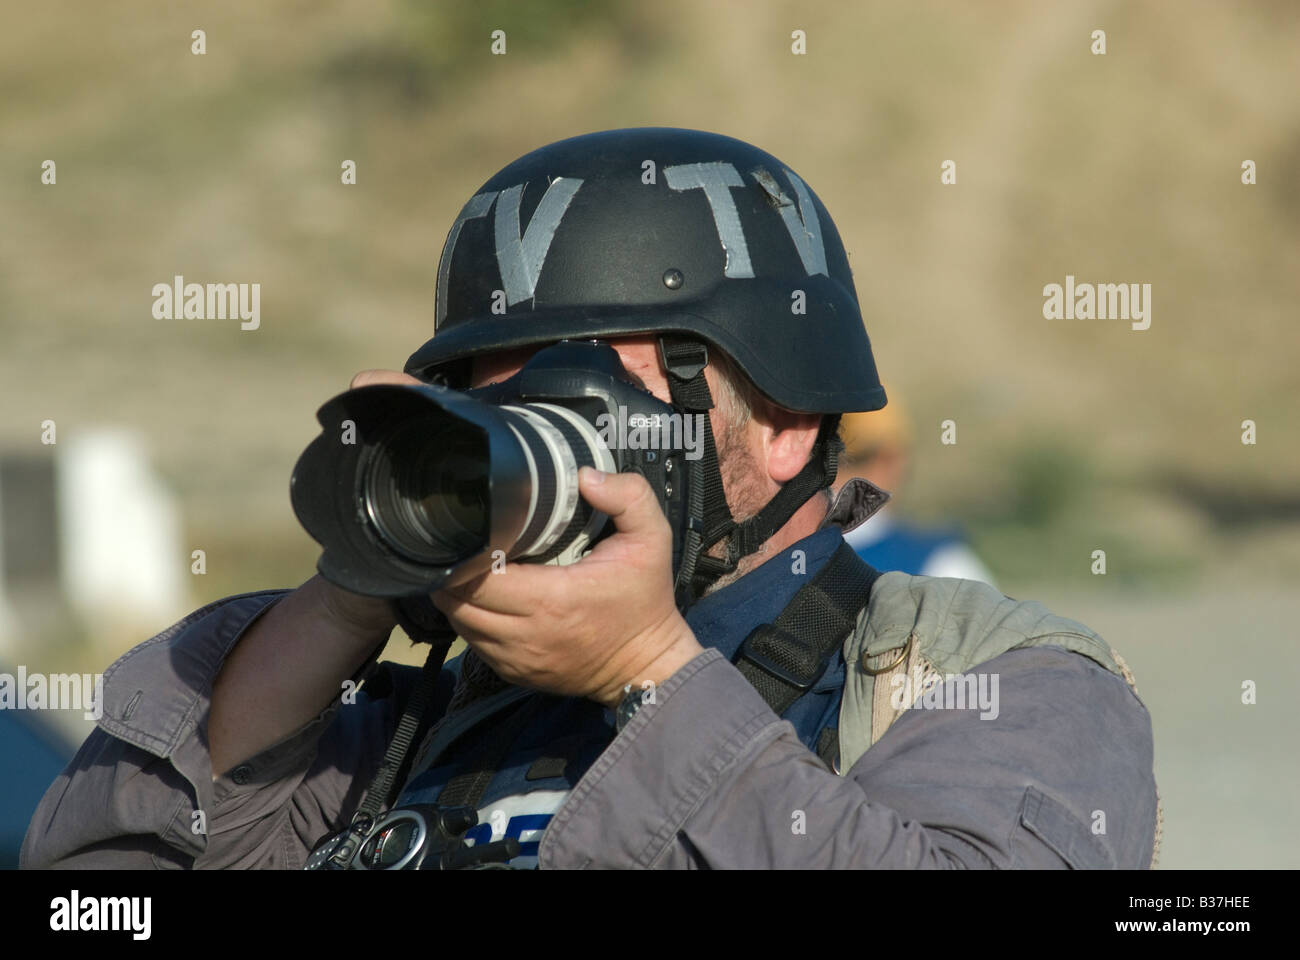 A photojournalist wearing a helmet marked 'TV'  takes a photo with a Canon DSLR camera during the Russo-Georgian War Stock Photo